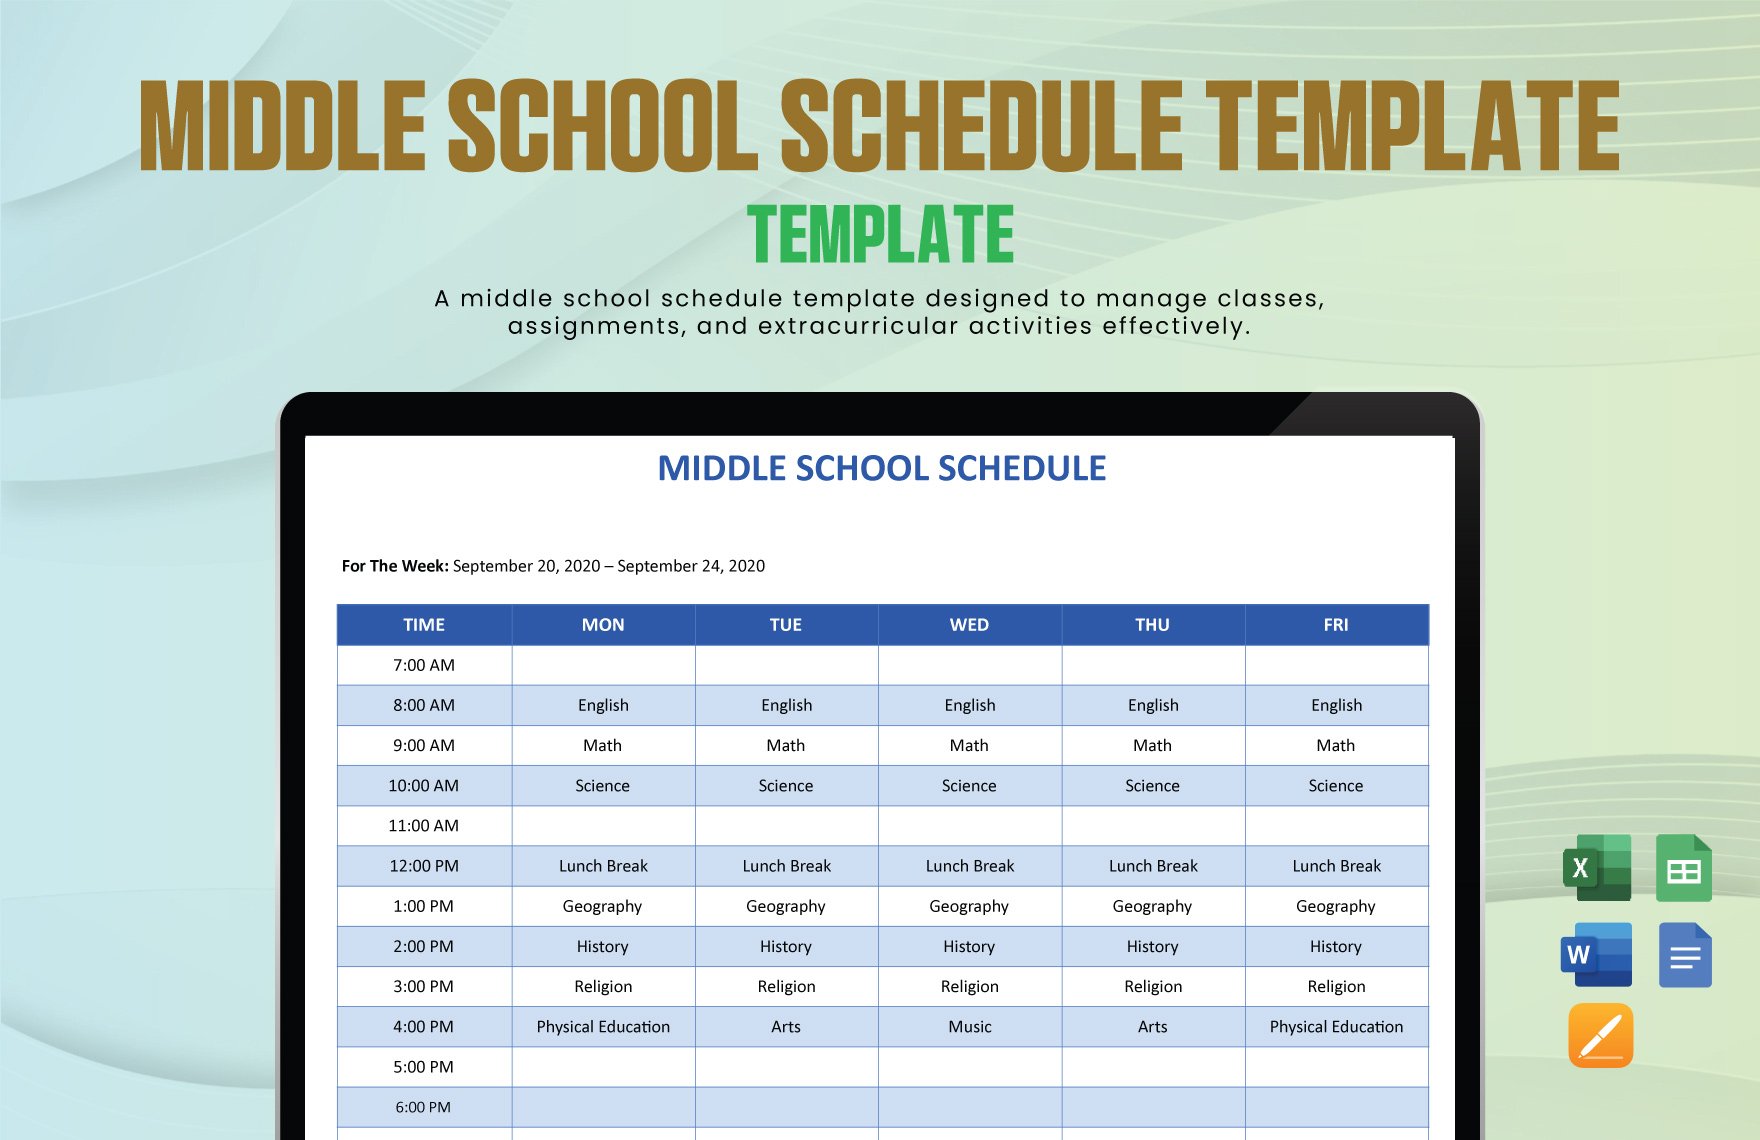 Middle School Schedule Template in Word, Google Docs, Excel, Google Sheets, Apple Pages